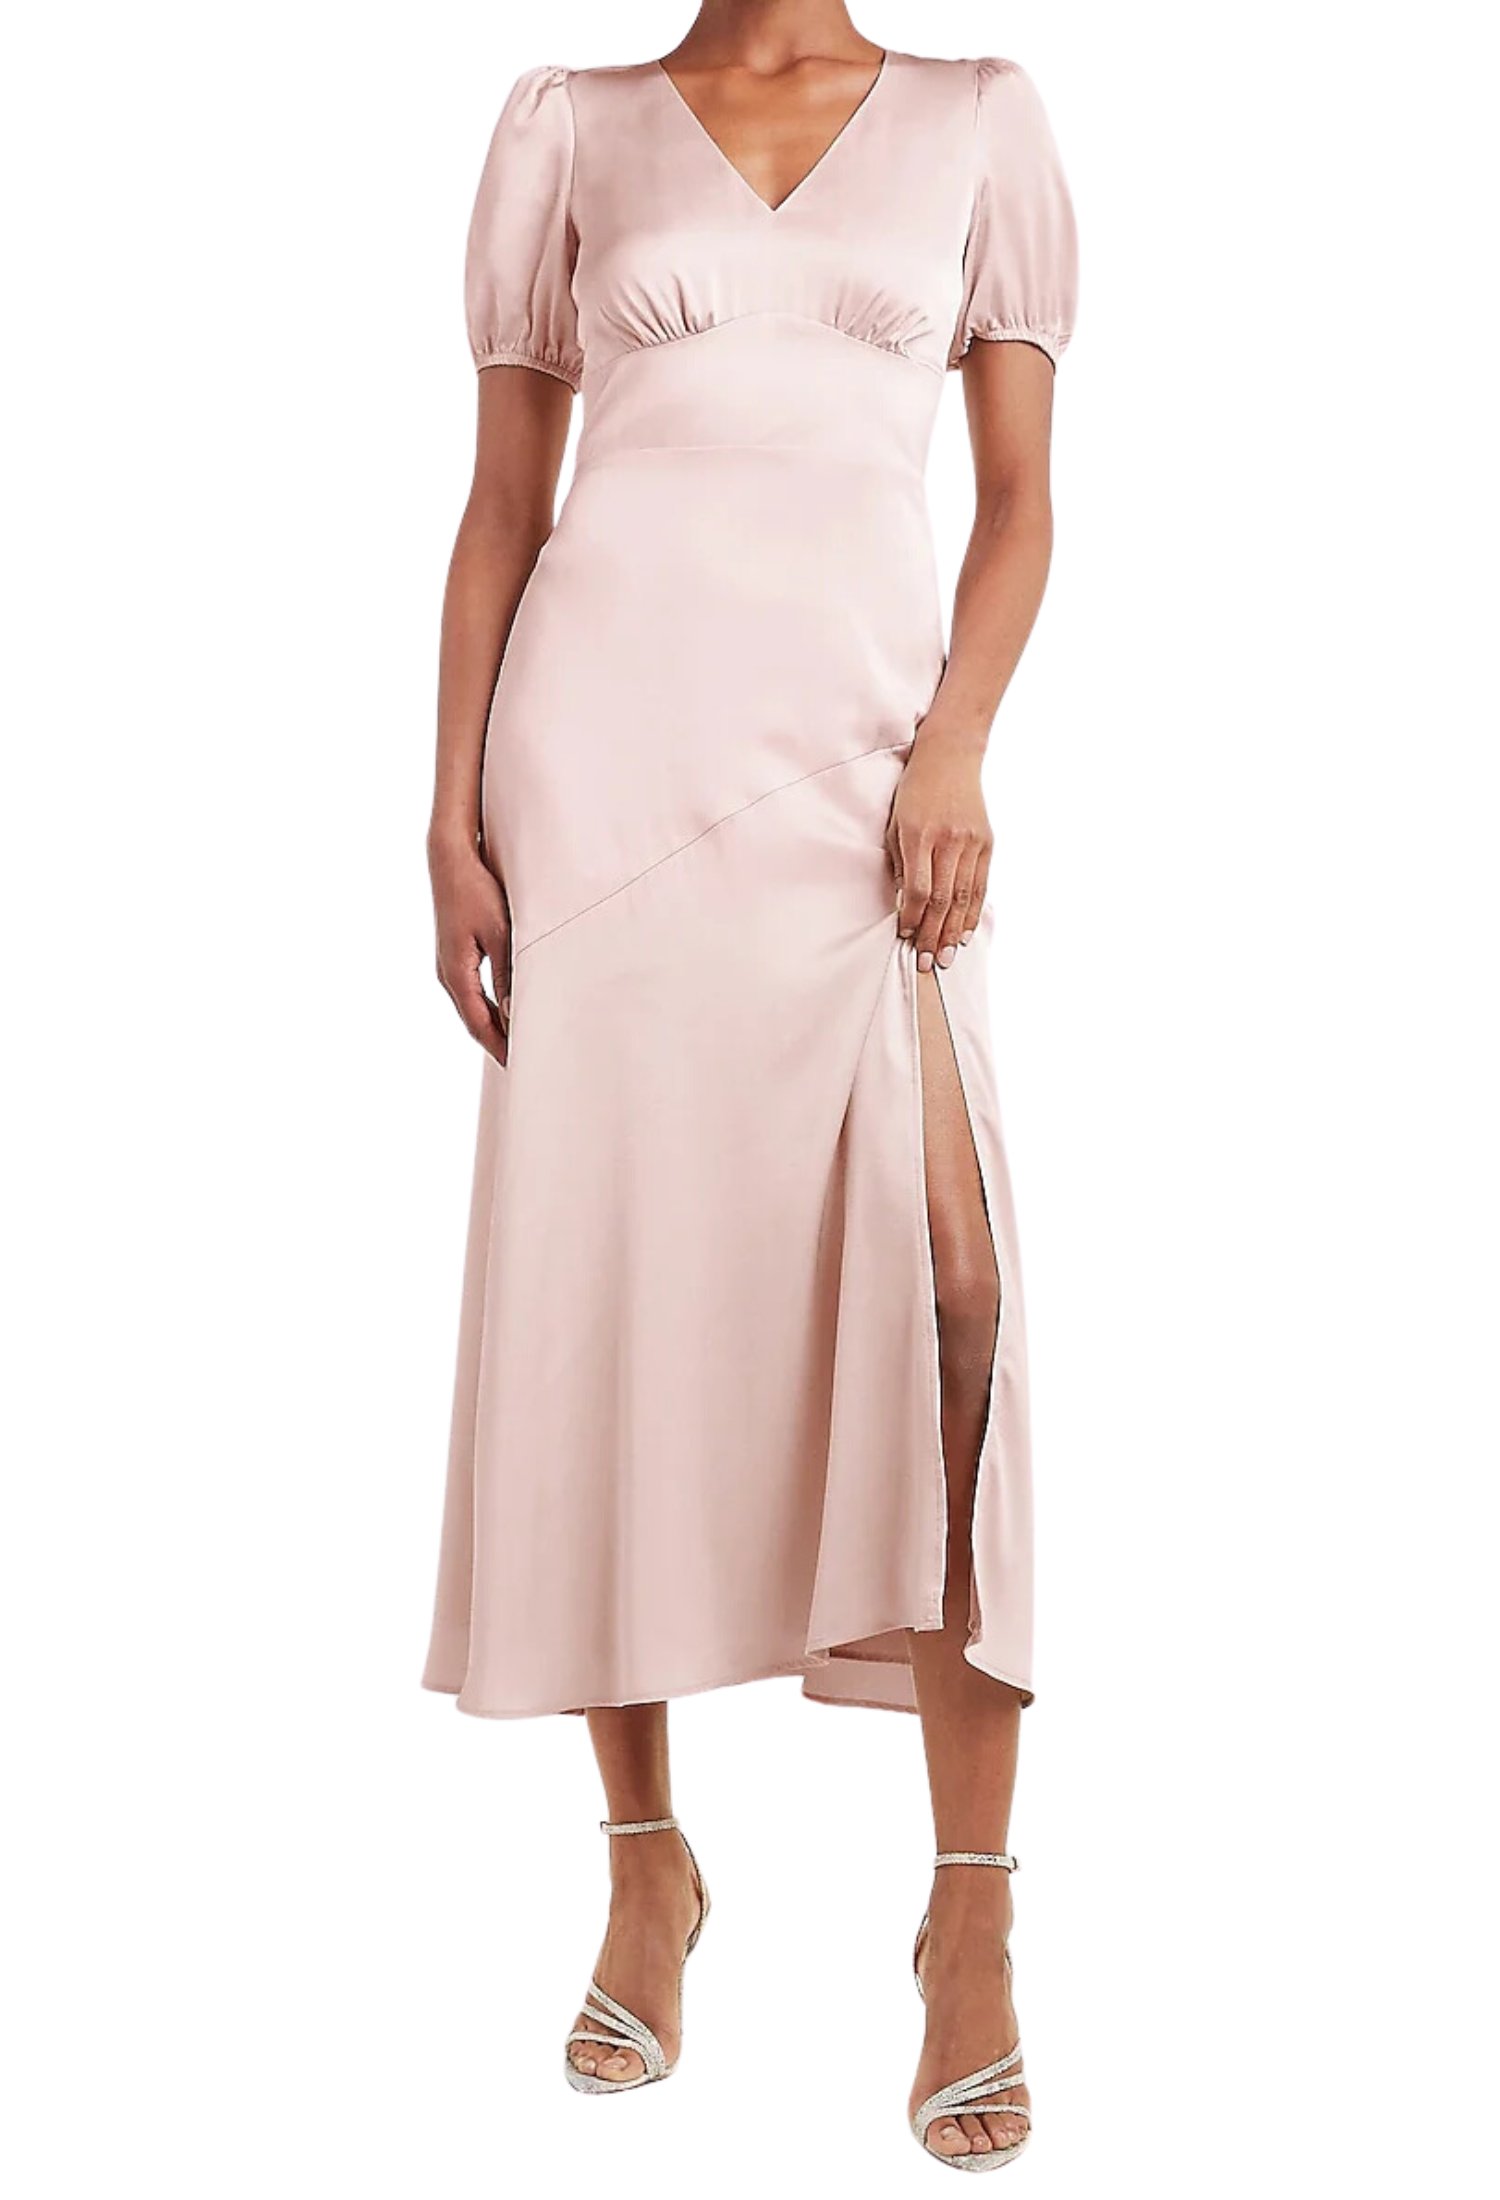 20 Beautiful Dresses You Can Rent To Wear for Easter Celebrations